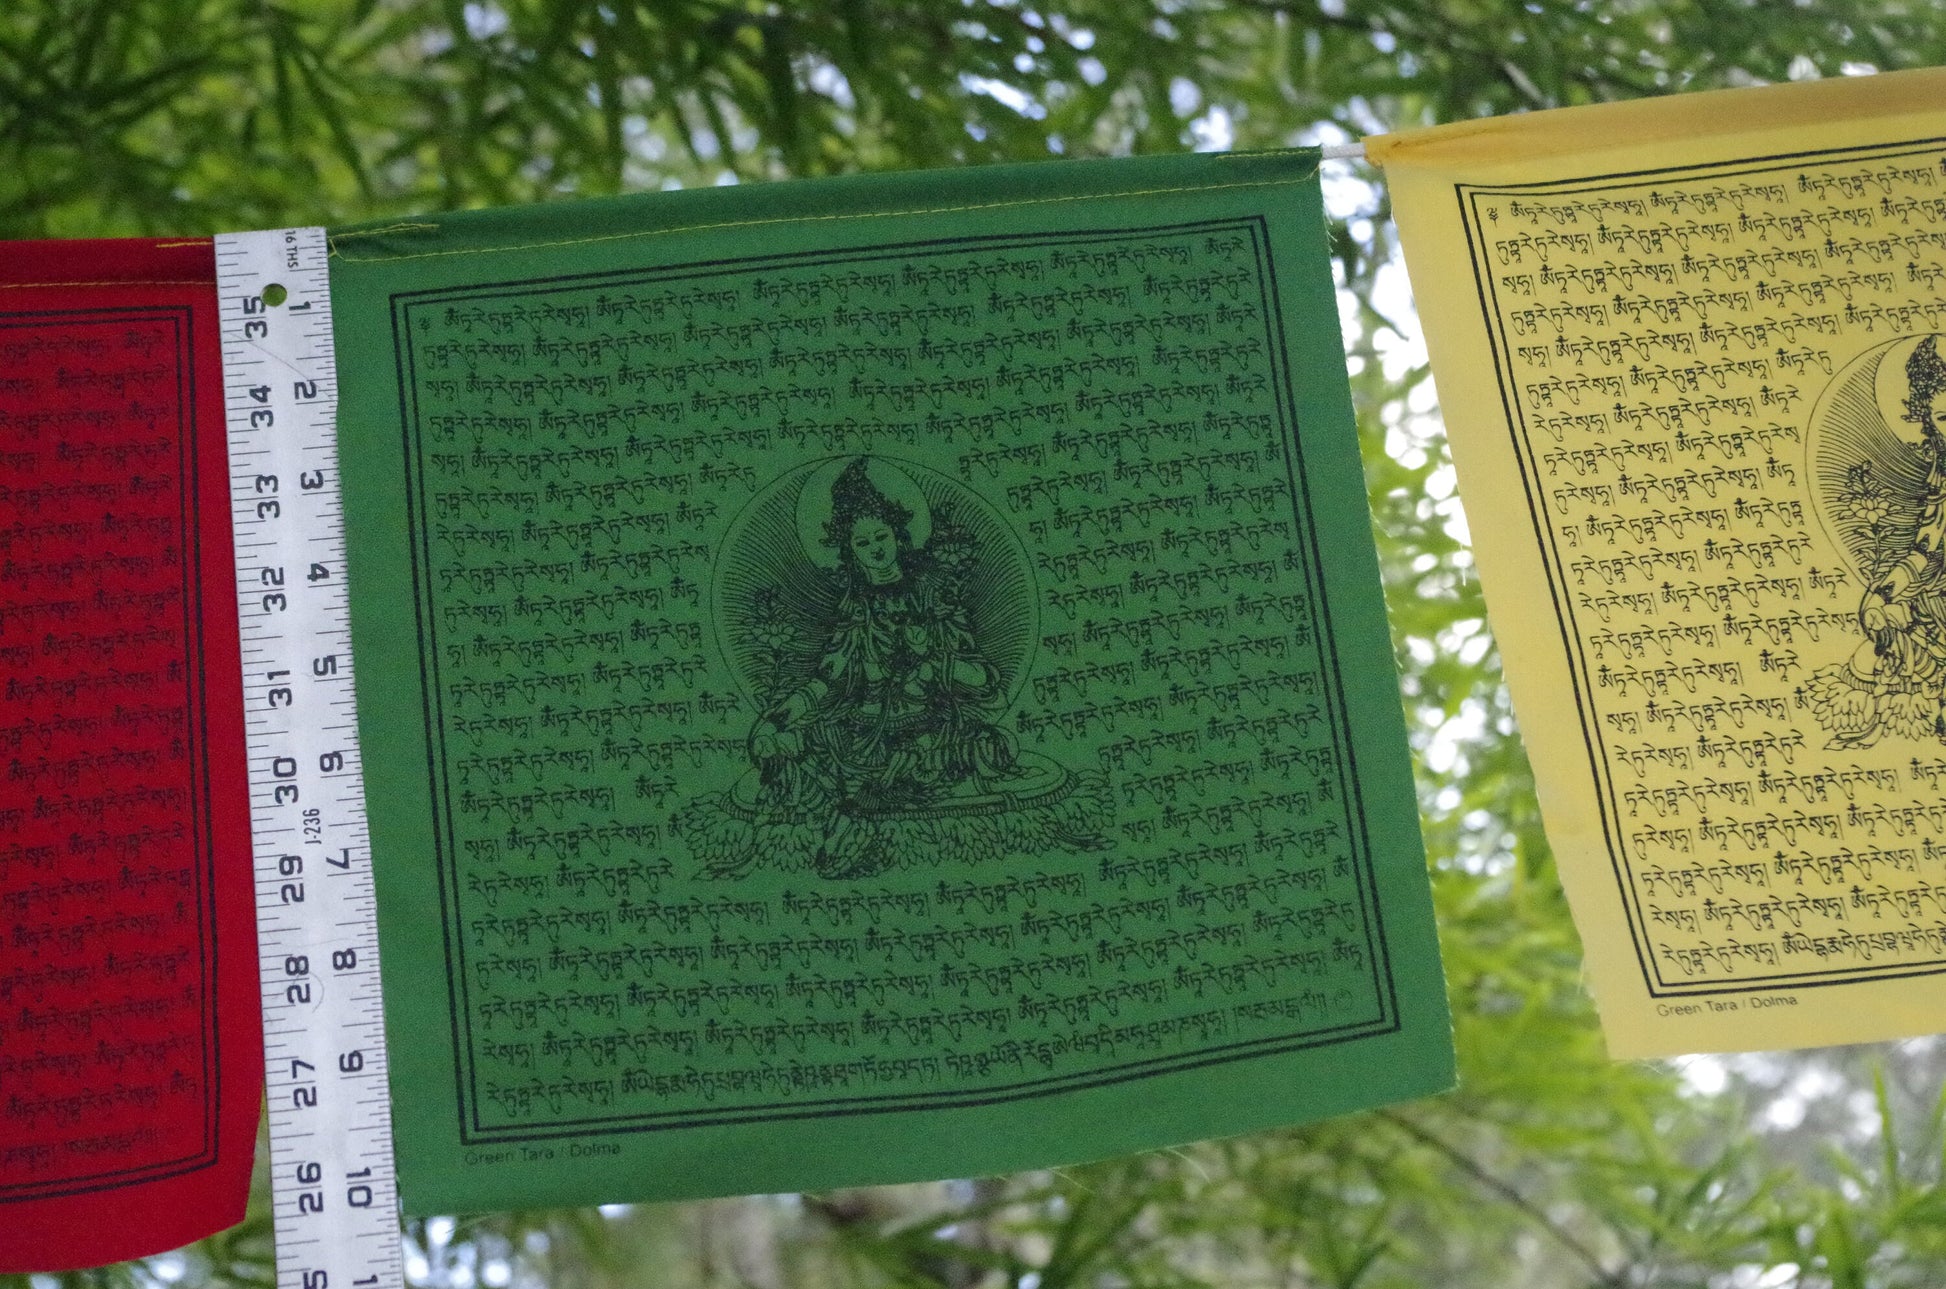 High-quality Green Tara prayer flag from 5-color set of 10, 10x10 in each. Imprinted in black ink with revered image of female Buddha of Compassion.